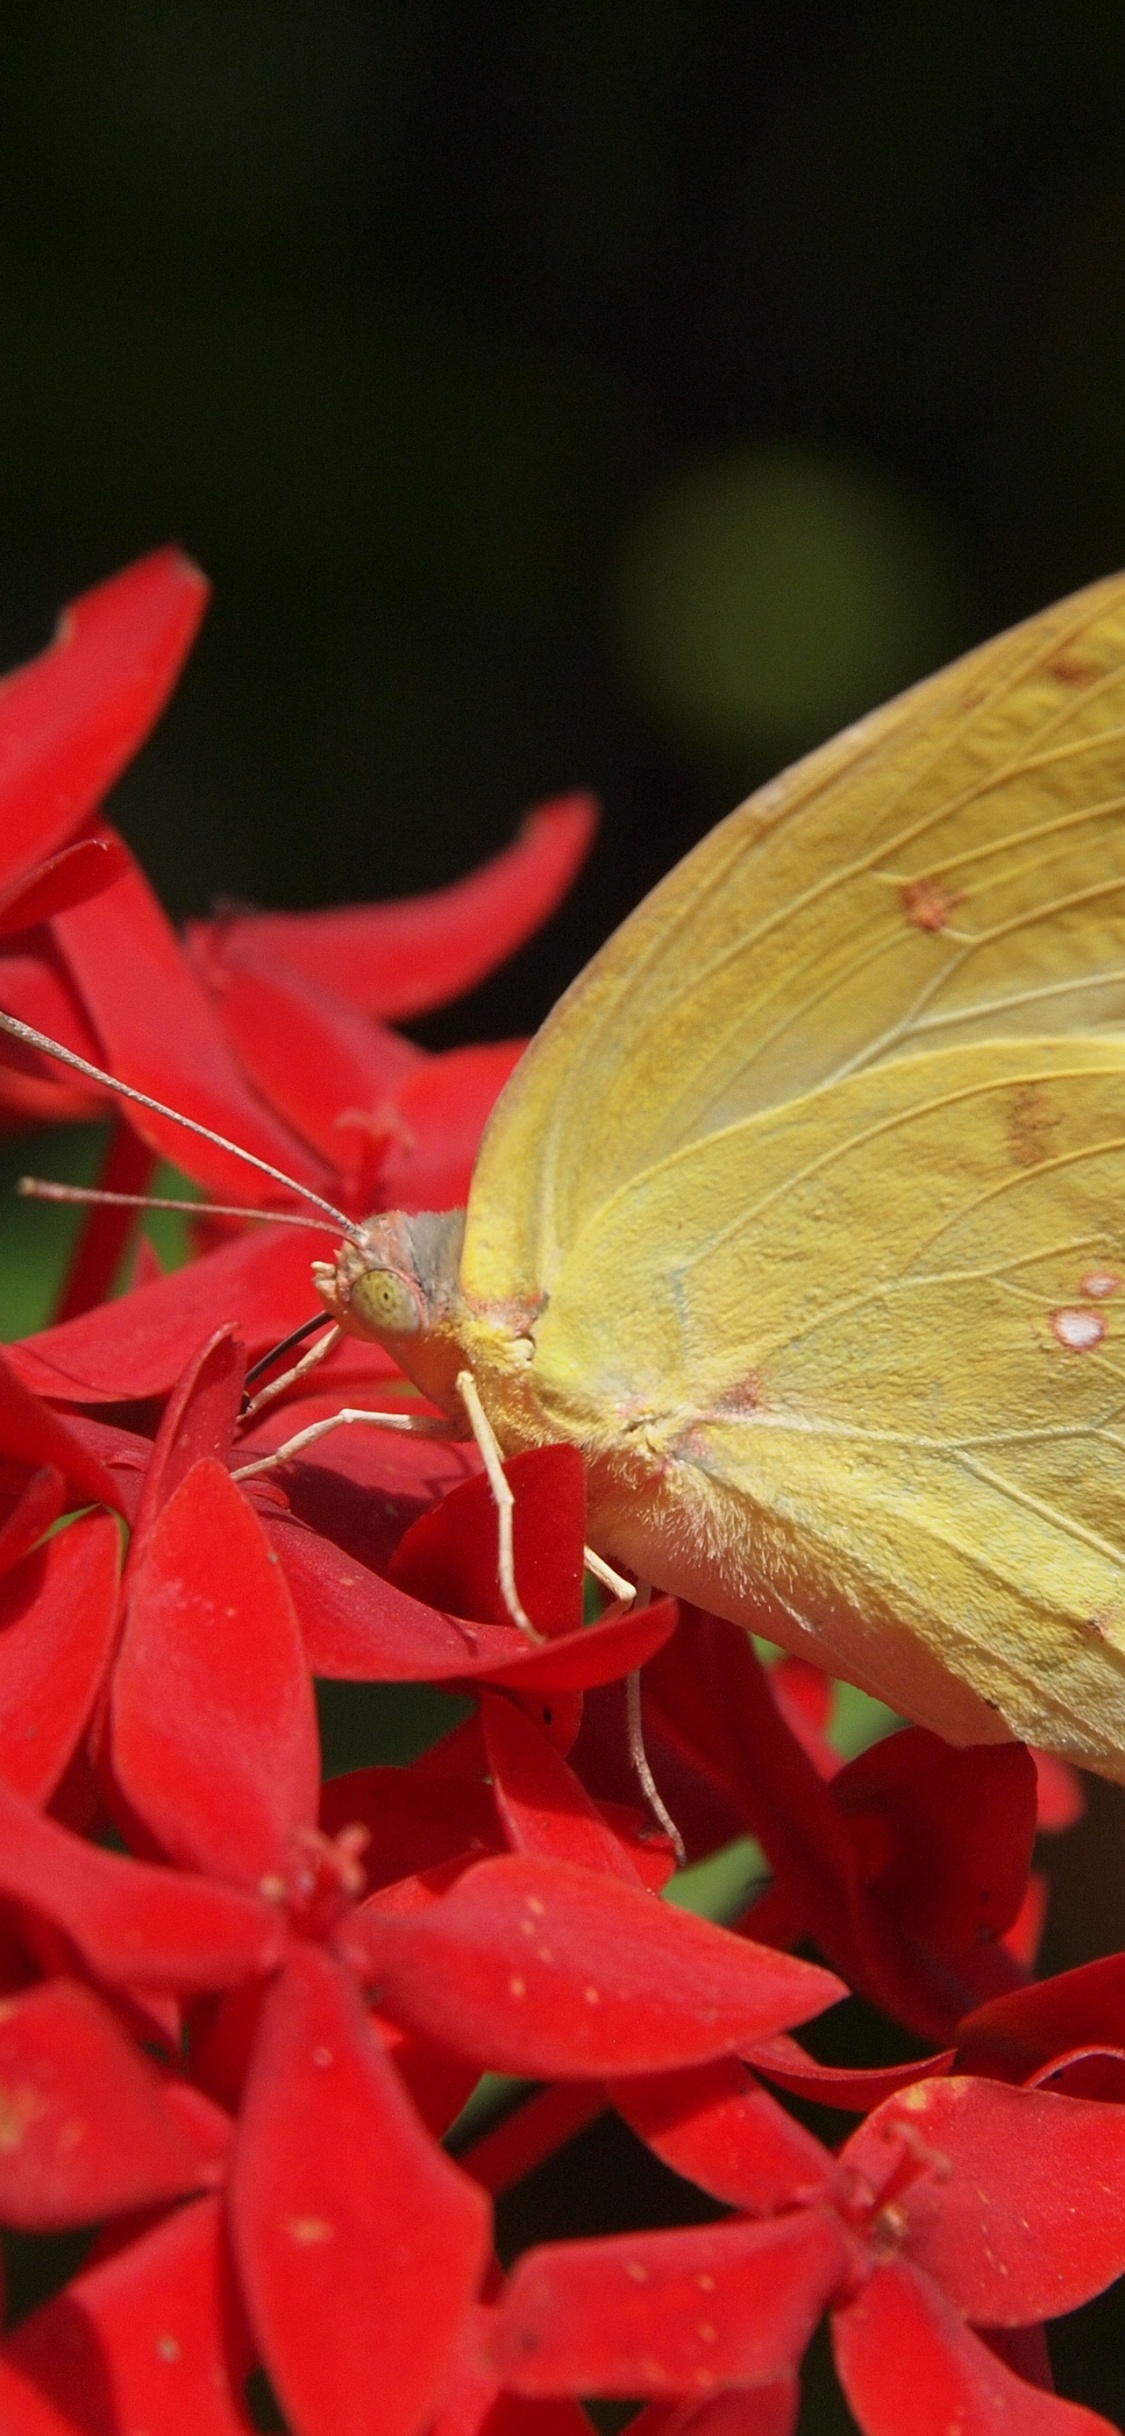 Yellow Butterfly Perched on Red Flower in Close up Photography During Daytime. Wallpaper in 1125x2436 Resolution